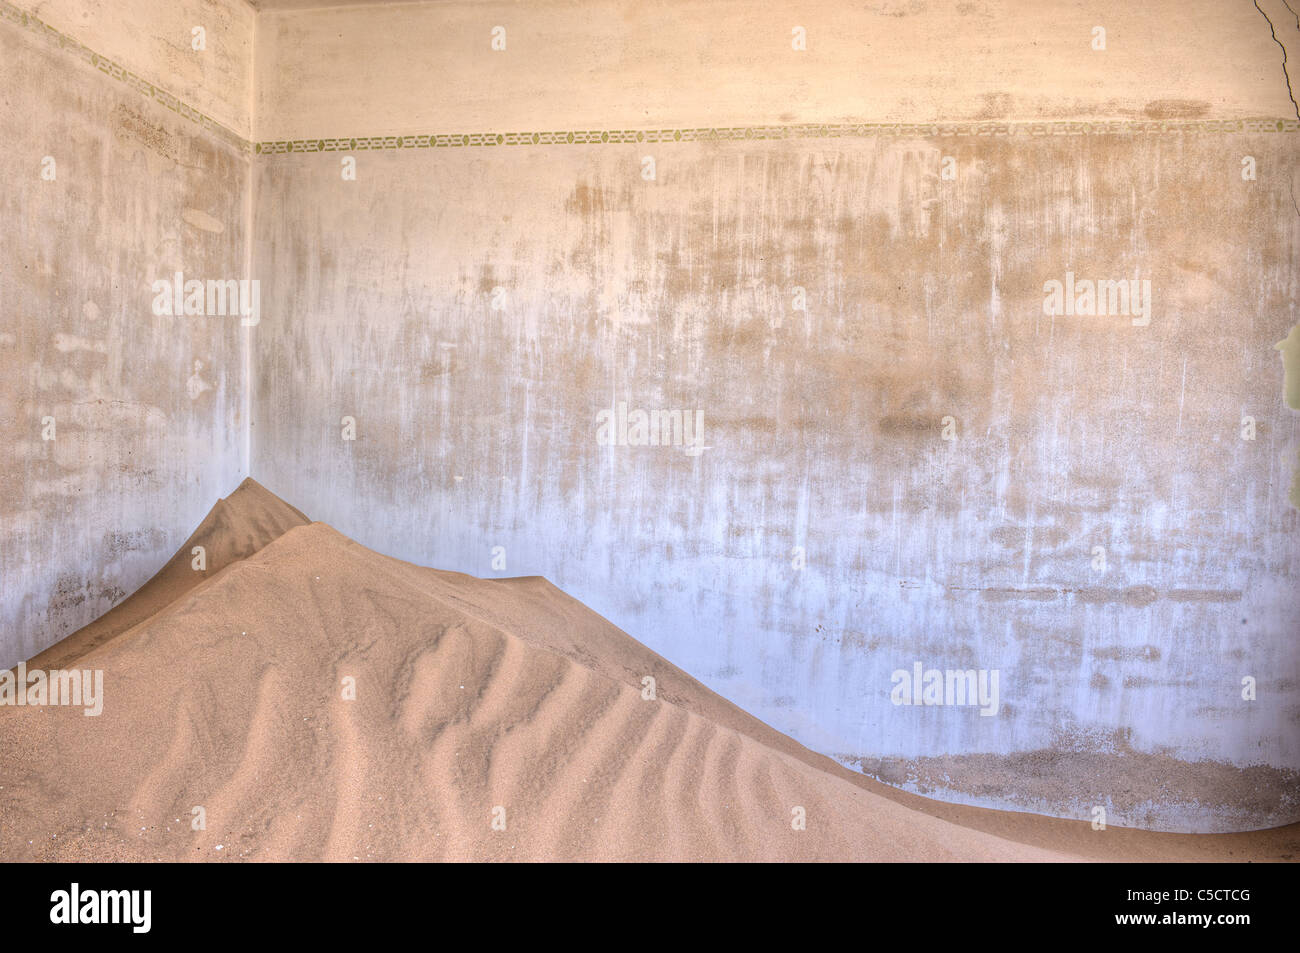 Blue wall in sand-filled building, Kolmanskop Ghost Town near Luderitz, Namibia, Africa. Stock Photo